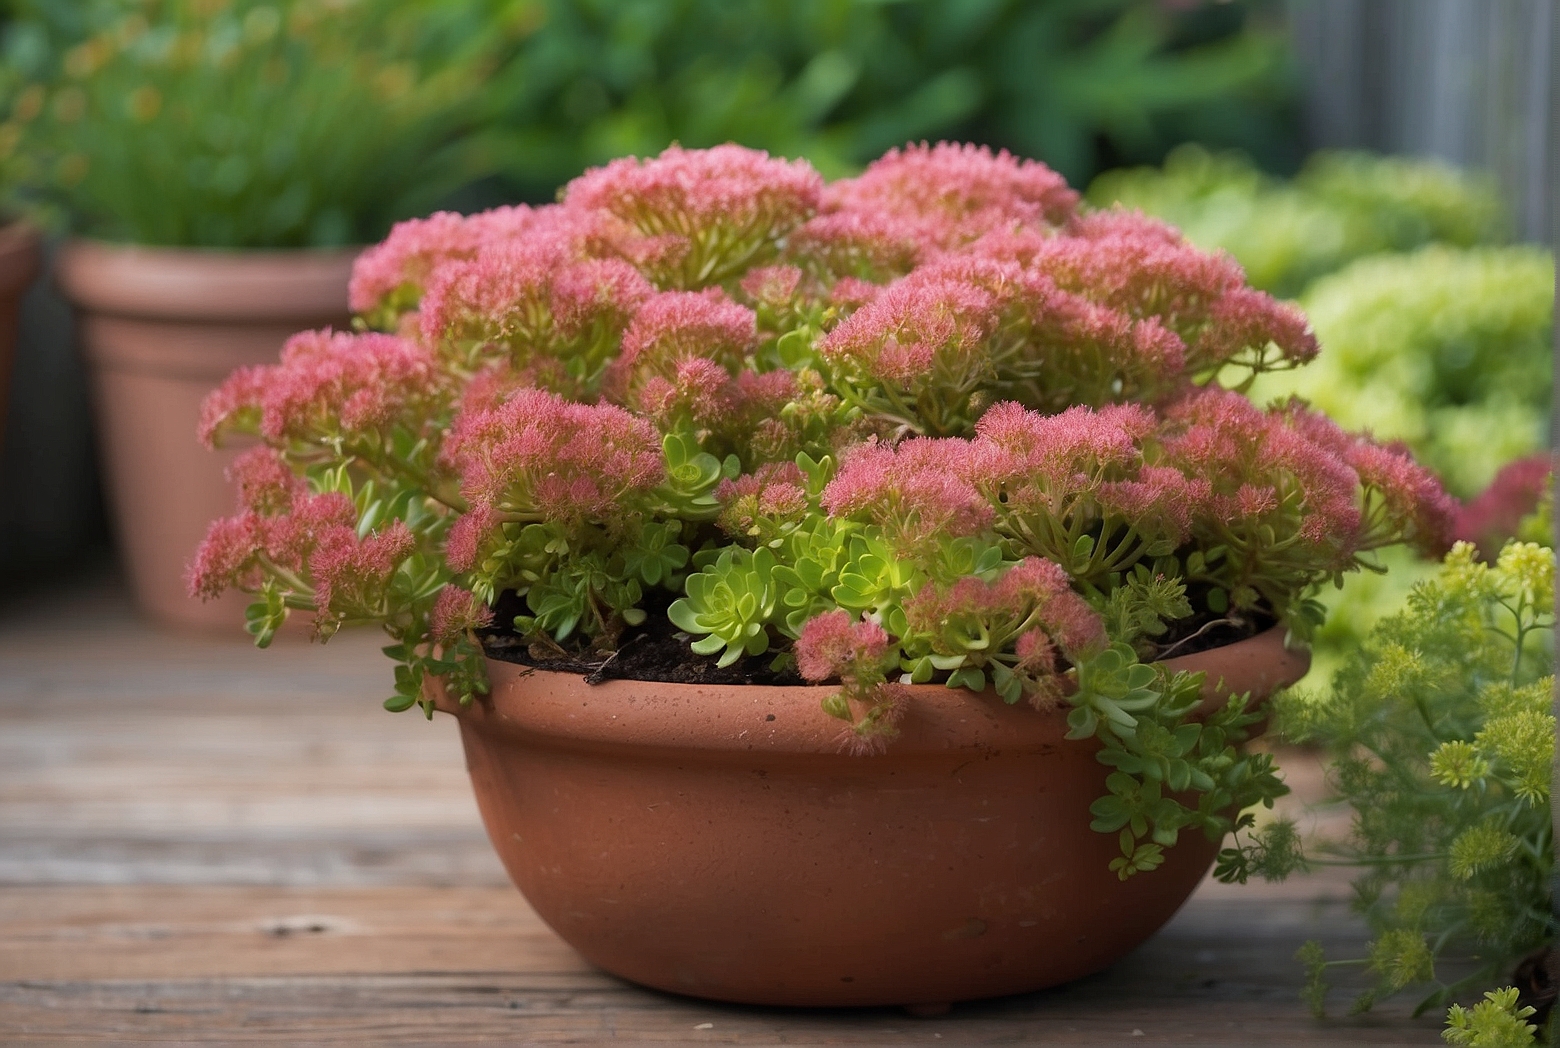 Mr. Goodbud Sedum: A Perfect Plant for Your Garden